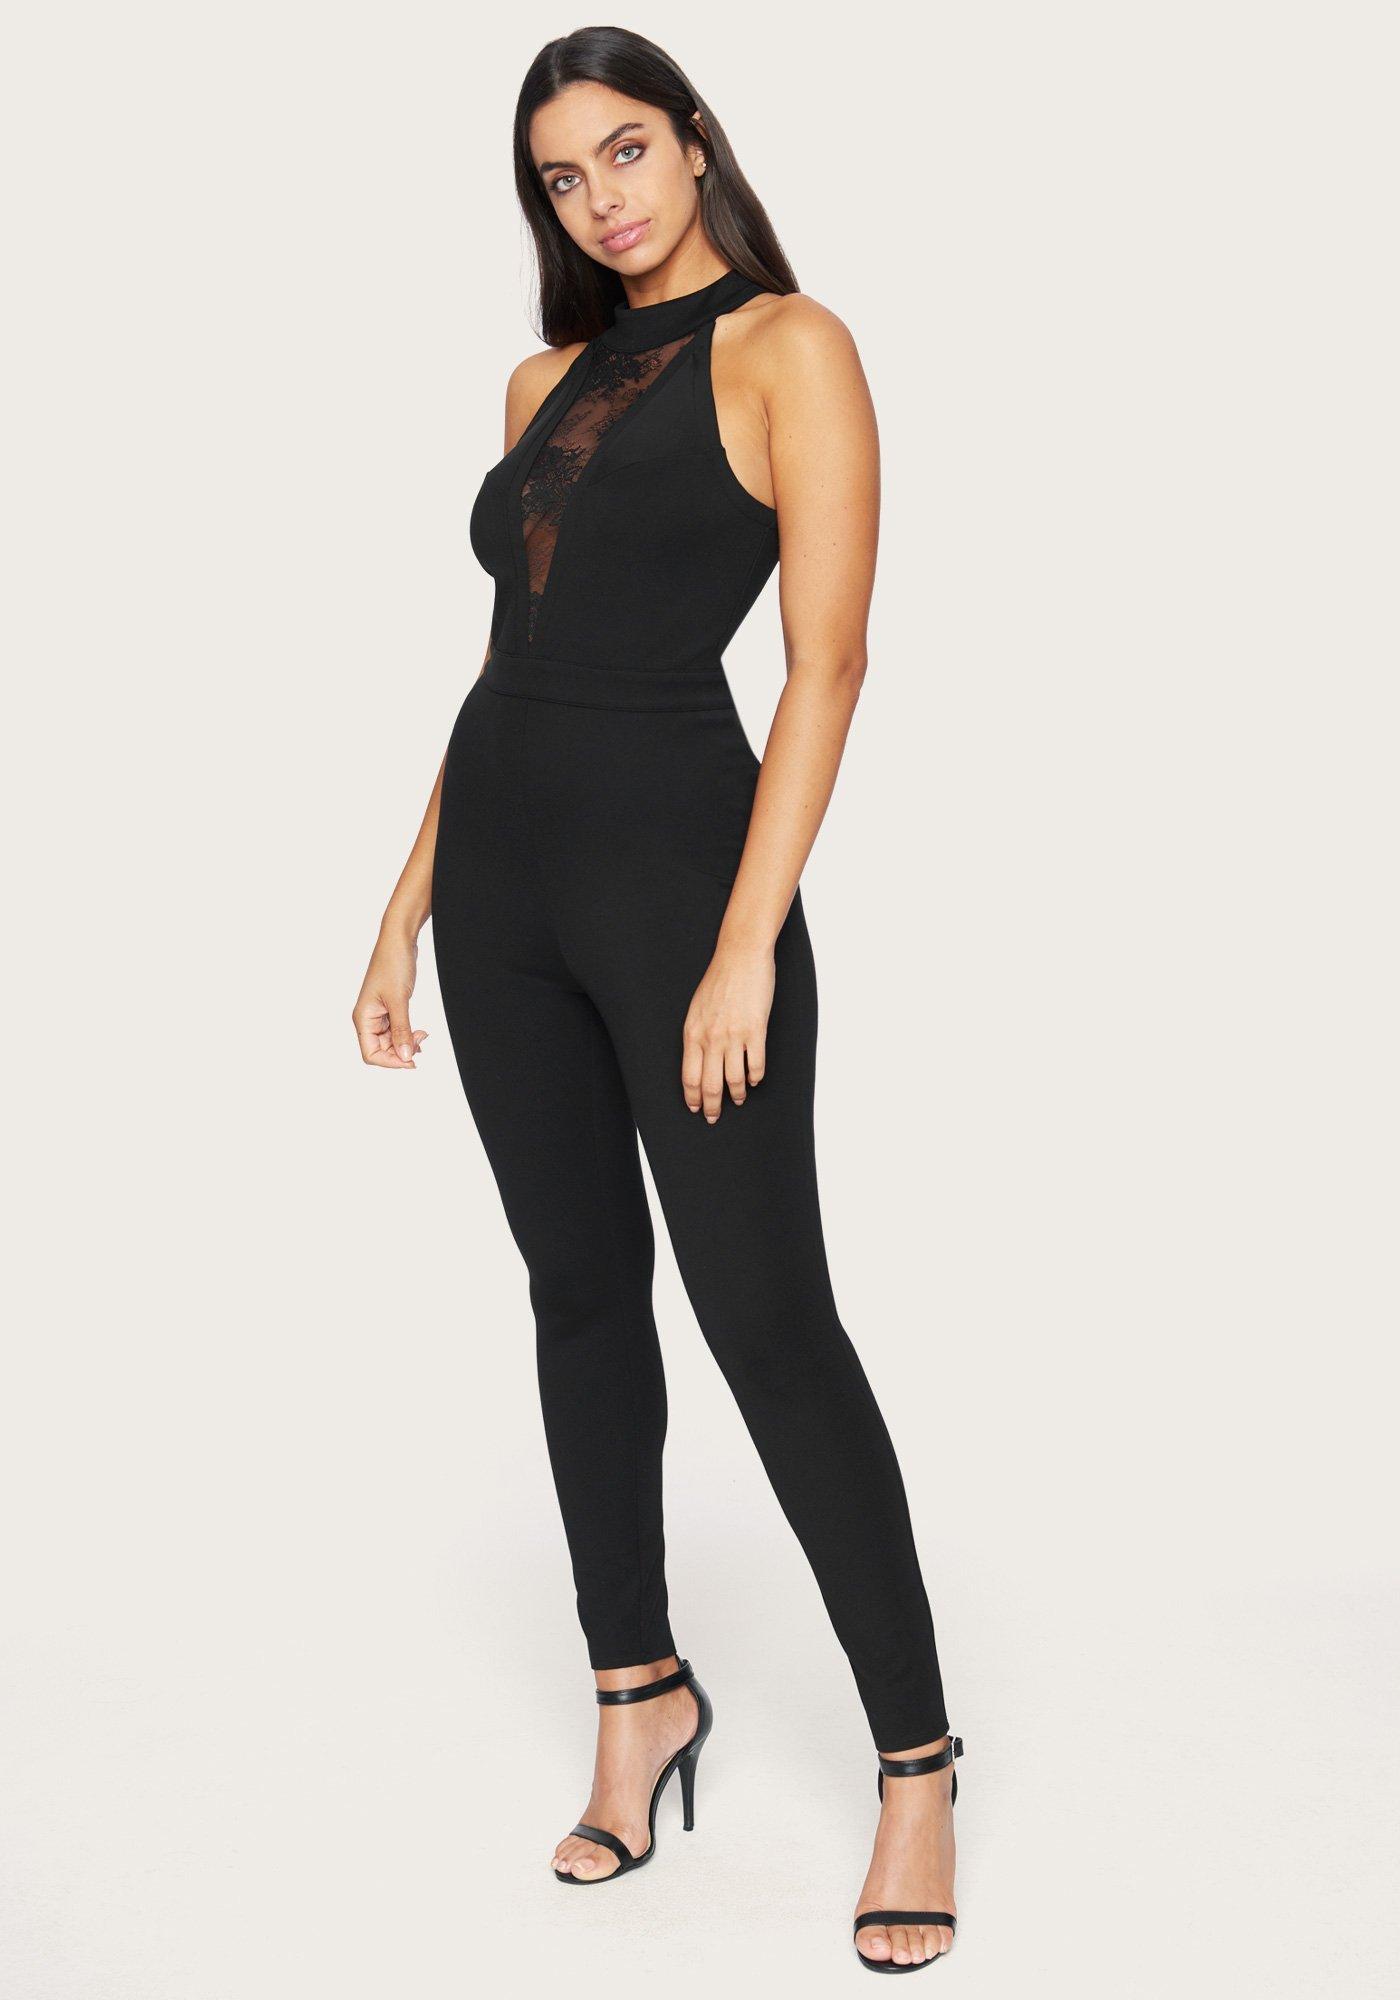 Bebe Ponte And Lace Jumpsuit in Black - Lyst